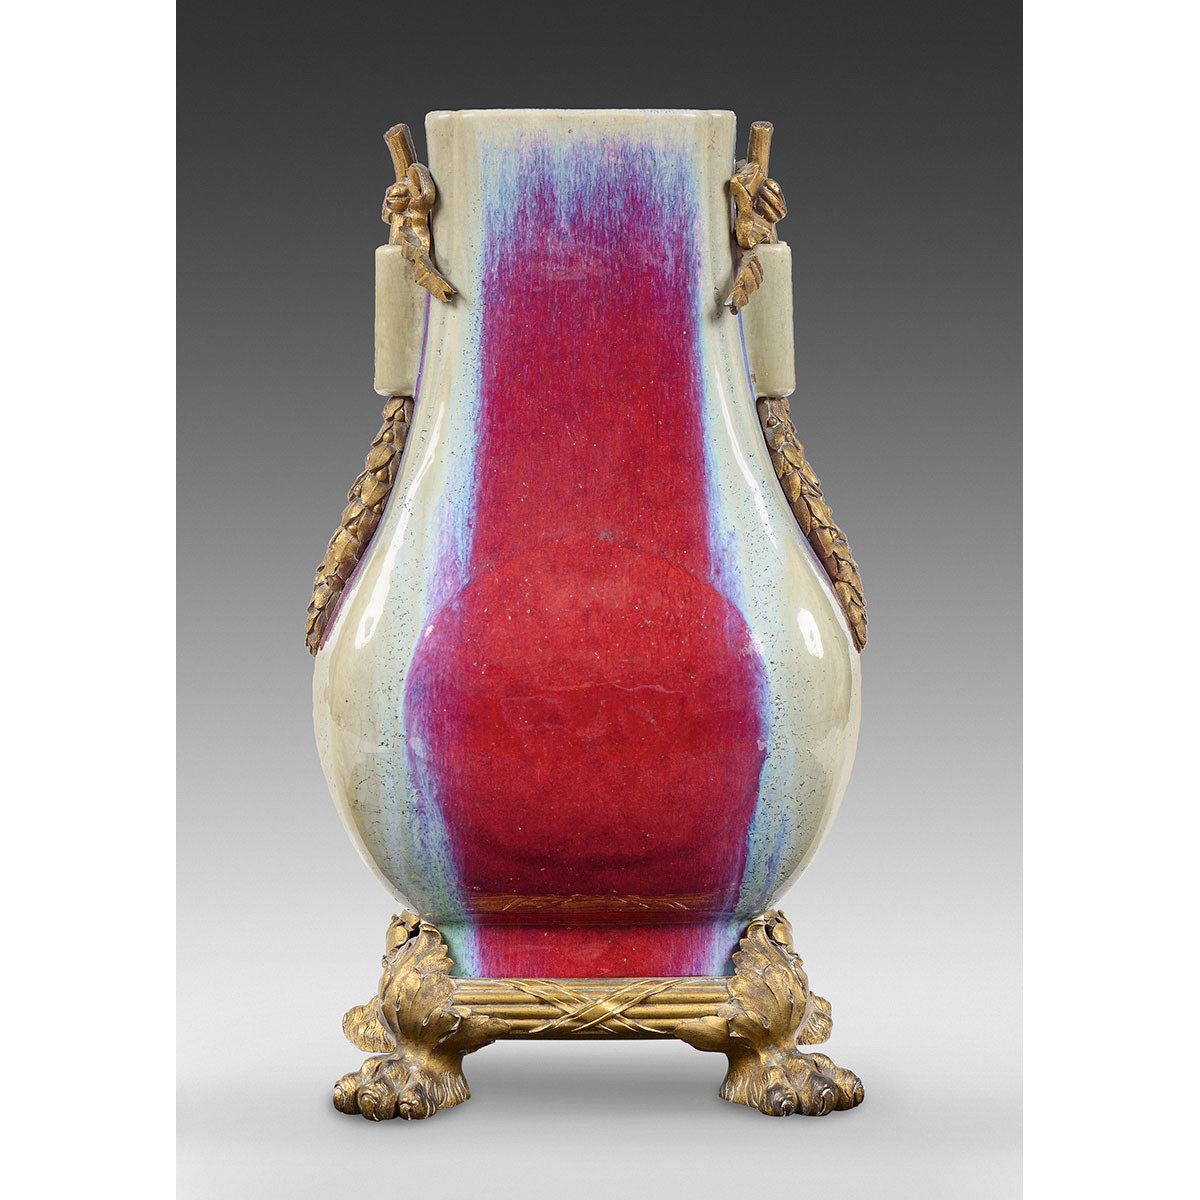 27 Recommended Chinese Meiping Vase 2024 free download chinese meiping vase of arts dasie millon riviera gauchet asian art inside lot 172 a chinese 19th c fanghu flambe vase daoguang seal mark and of the period with a french 19th c gilt bronze m